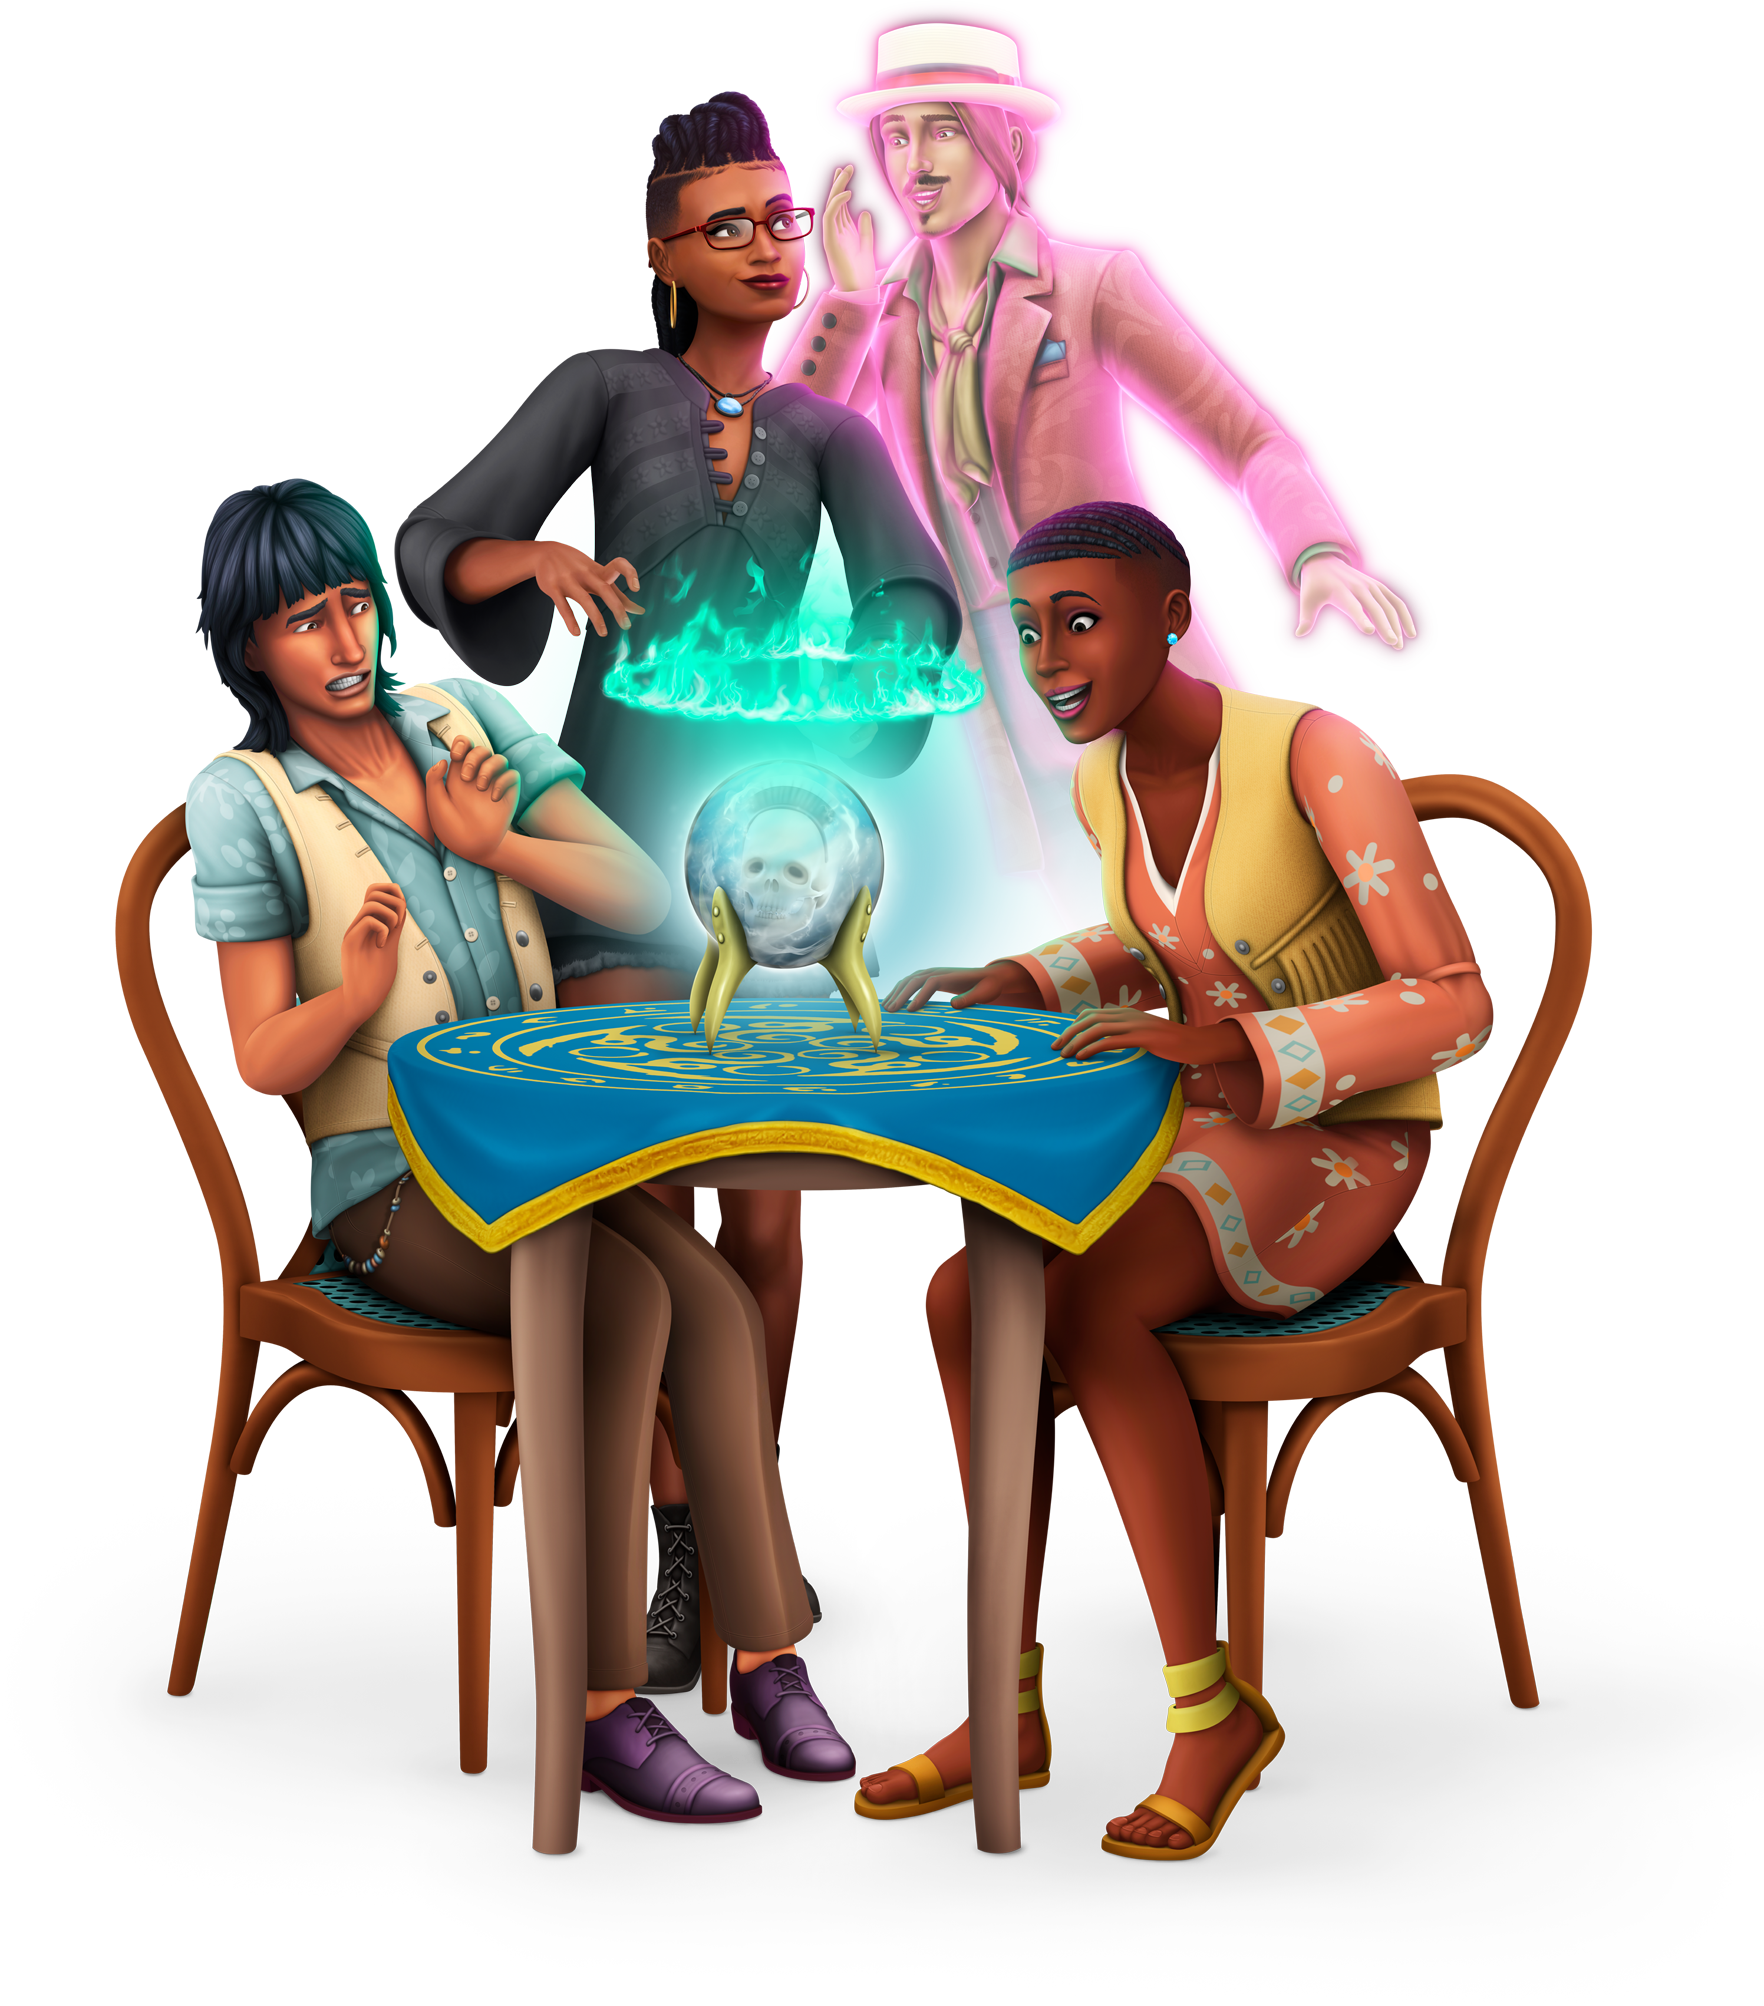  The Sims 4: Paranormal Stuff Render